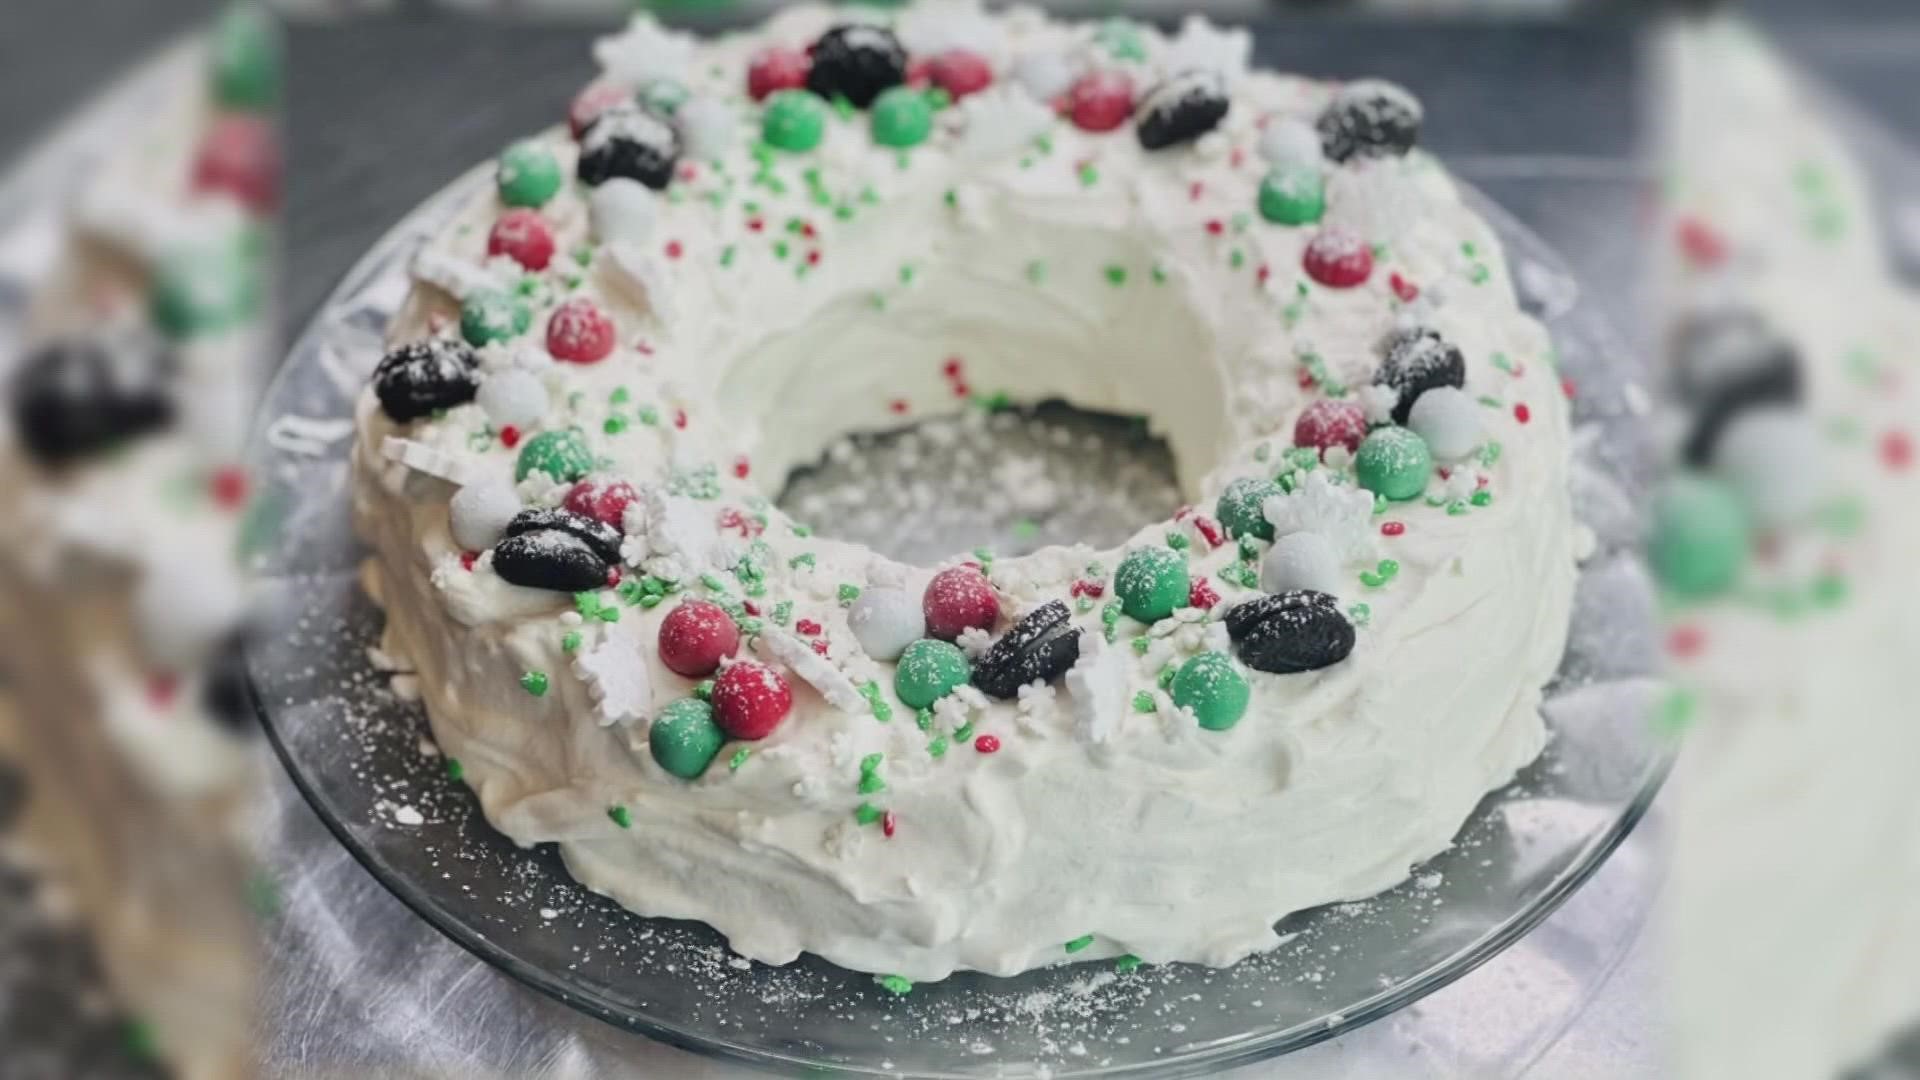 What better way to get in the Christmas spirit than by making a festive cake? This week, 10TV's Brittany Bailey shows you how to make a cake fit for the holidays.